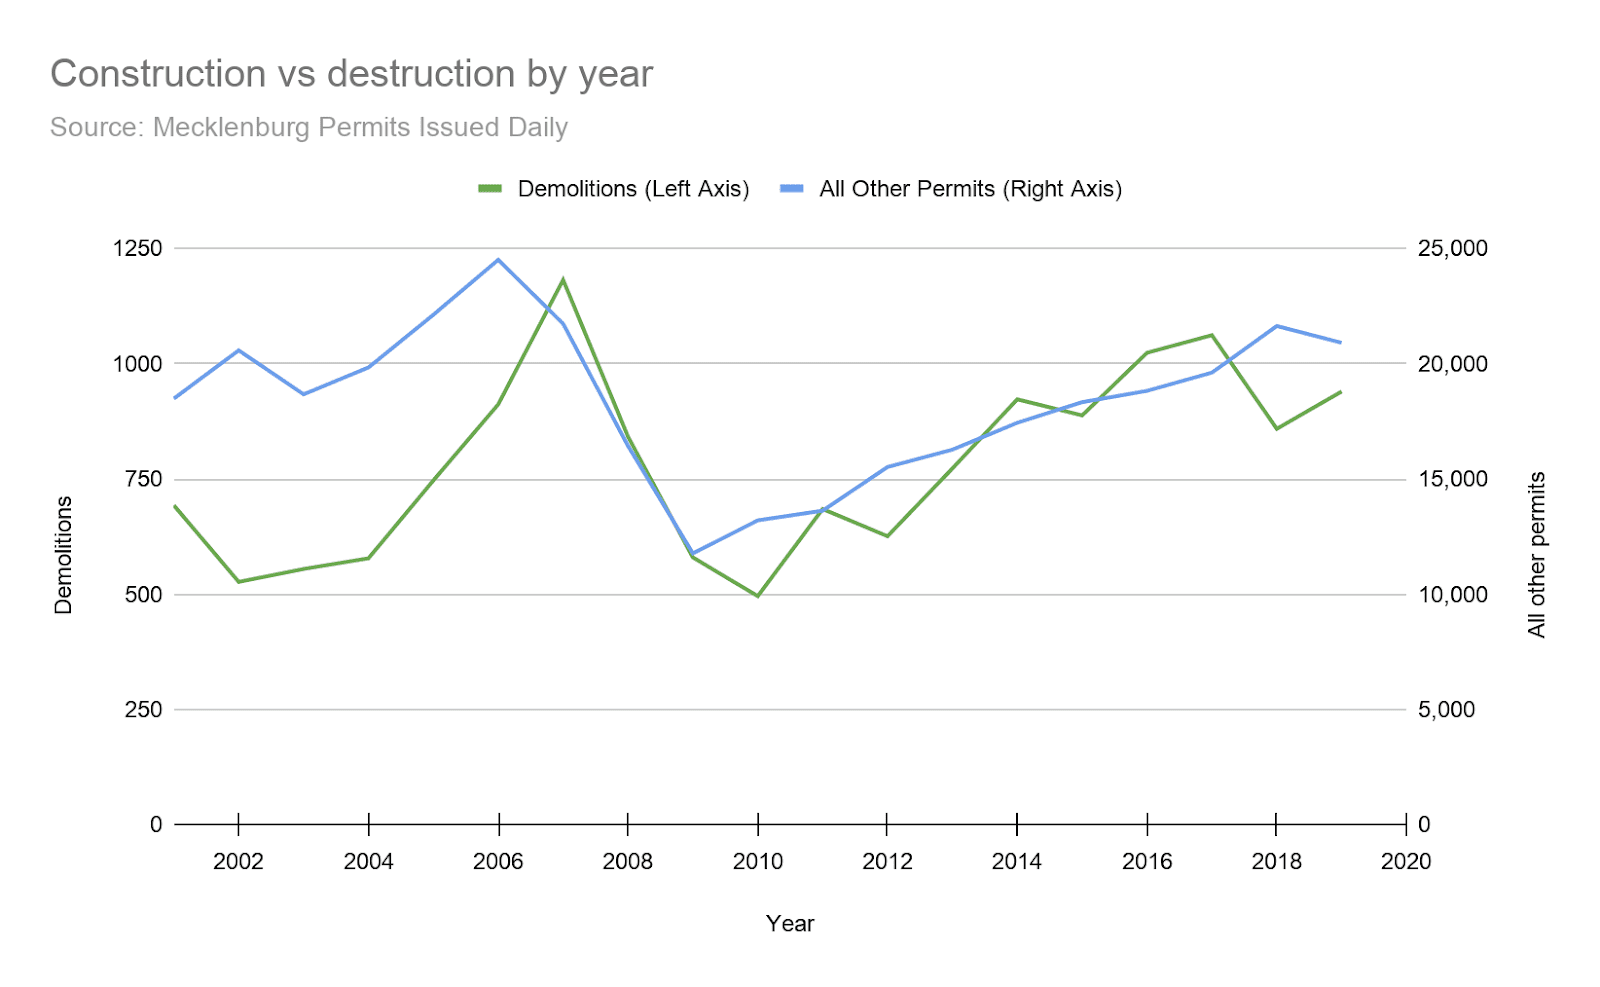 A graph of the construction versus destruction by year from 2002 to 2020.